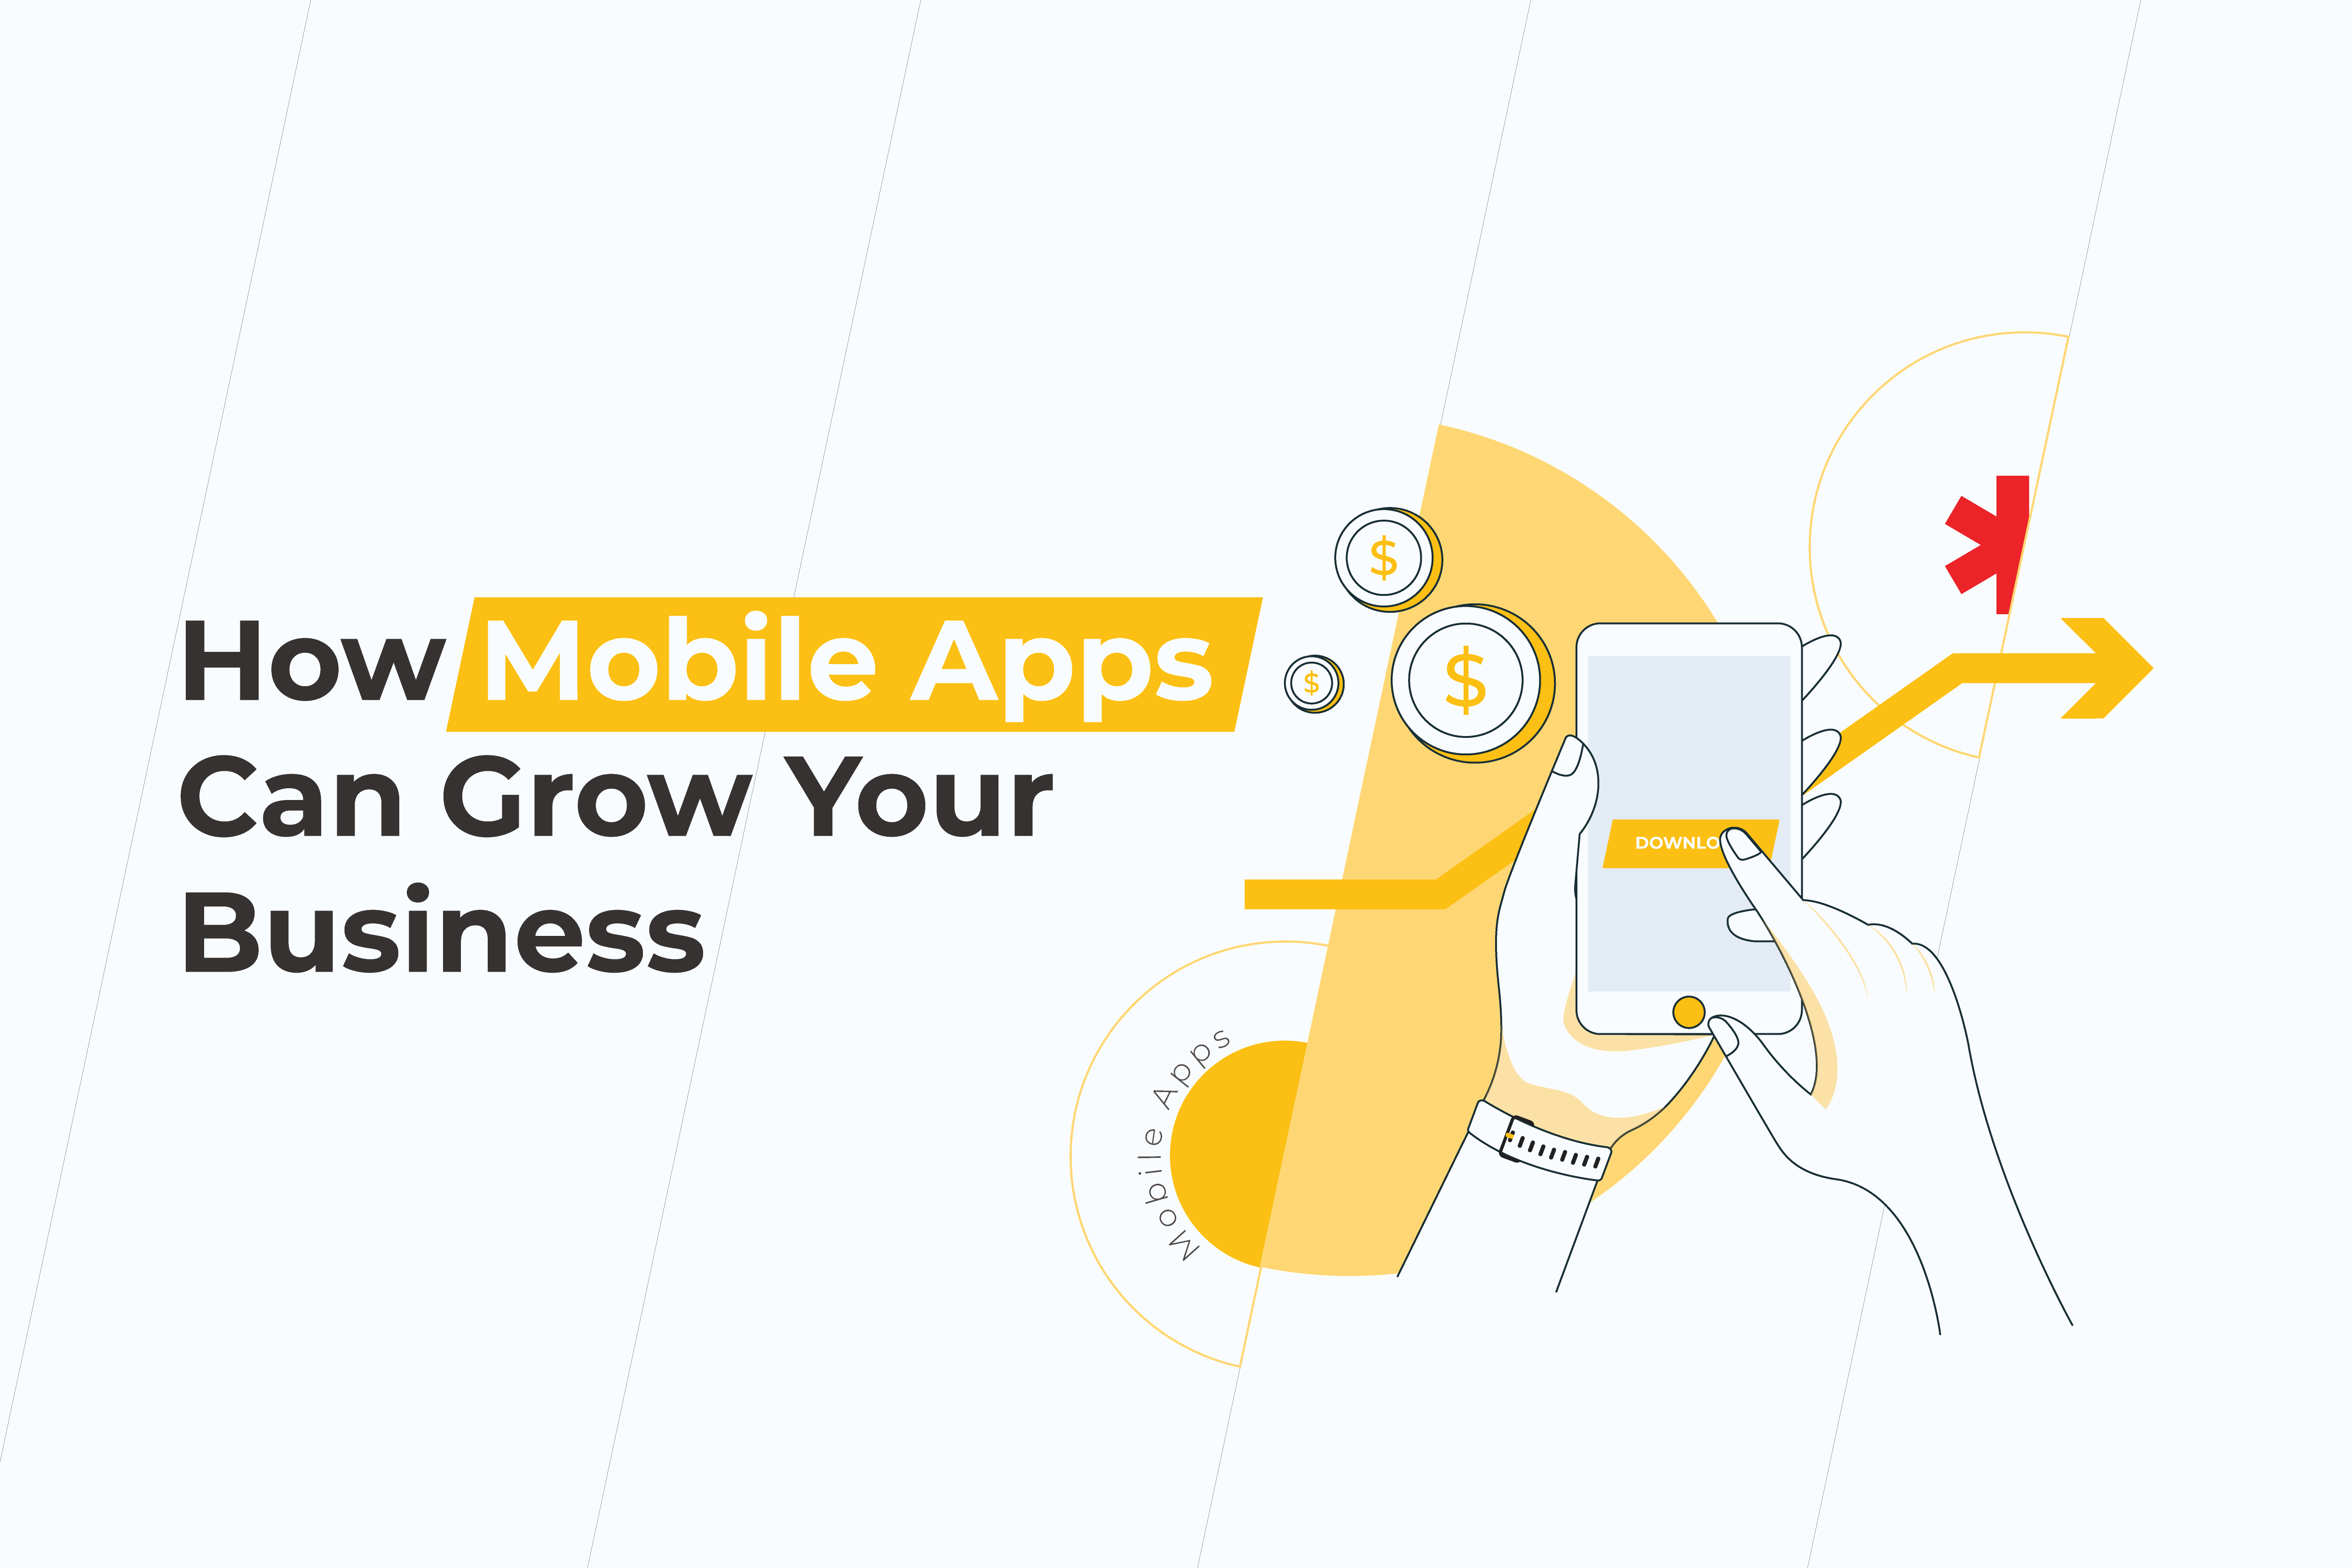 How Mobile Apps Can Grow Your Business